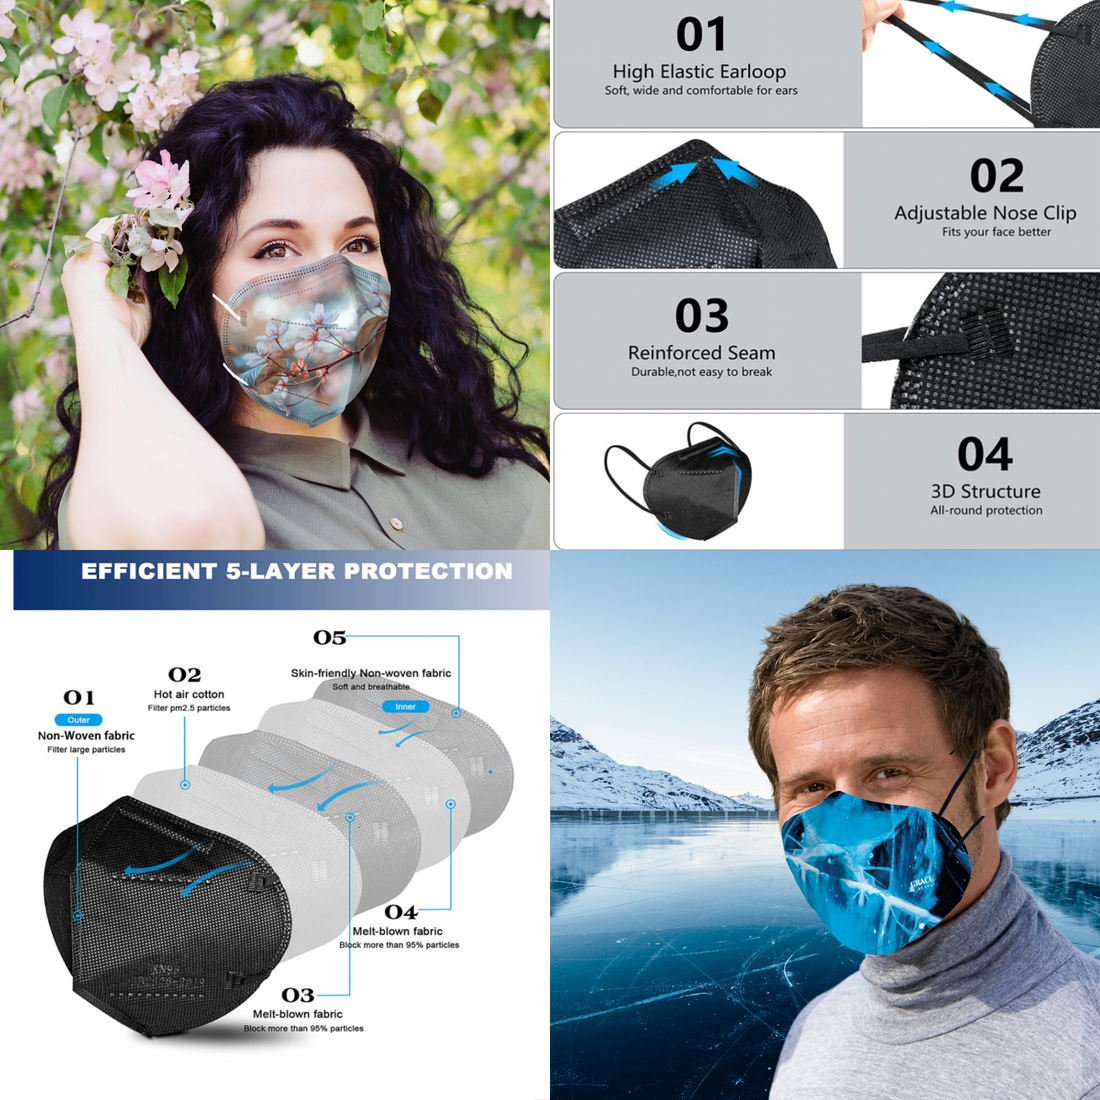 "KN95 Face Masks: A Powerful Tool in the Fight Against COVID-19"